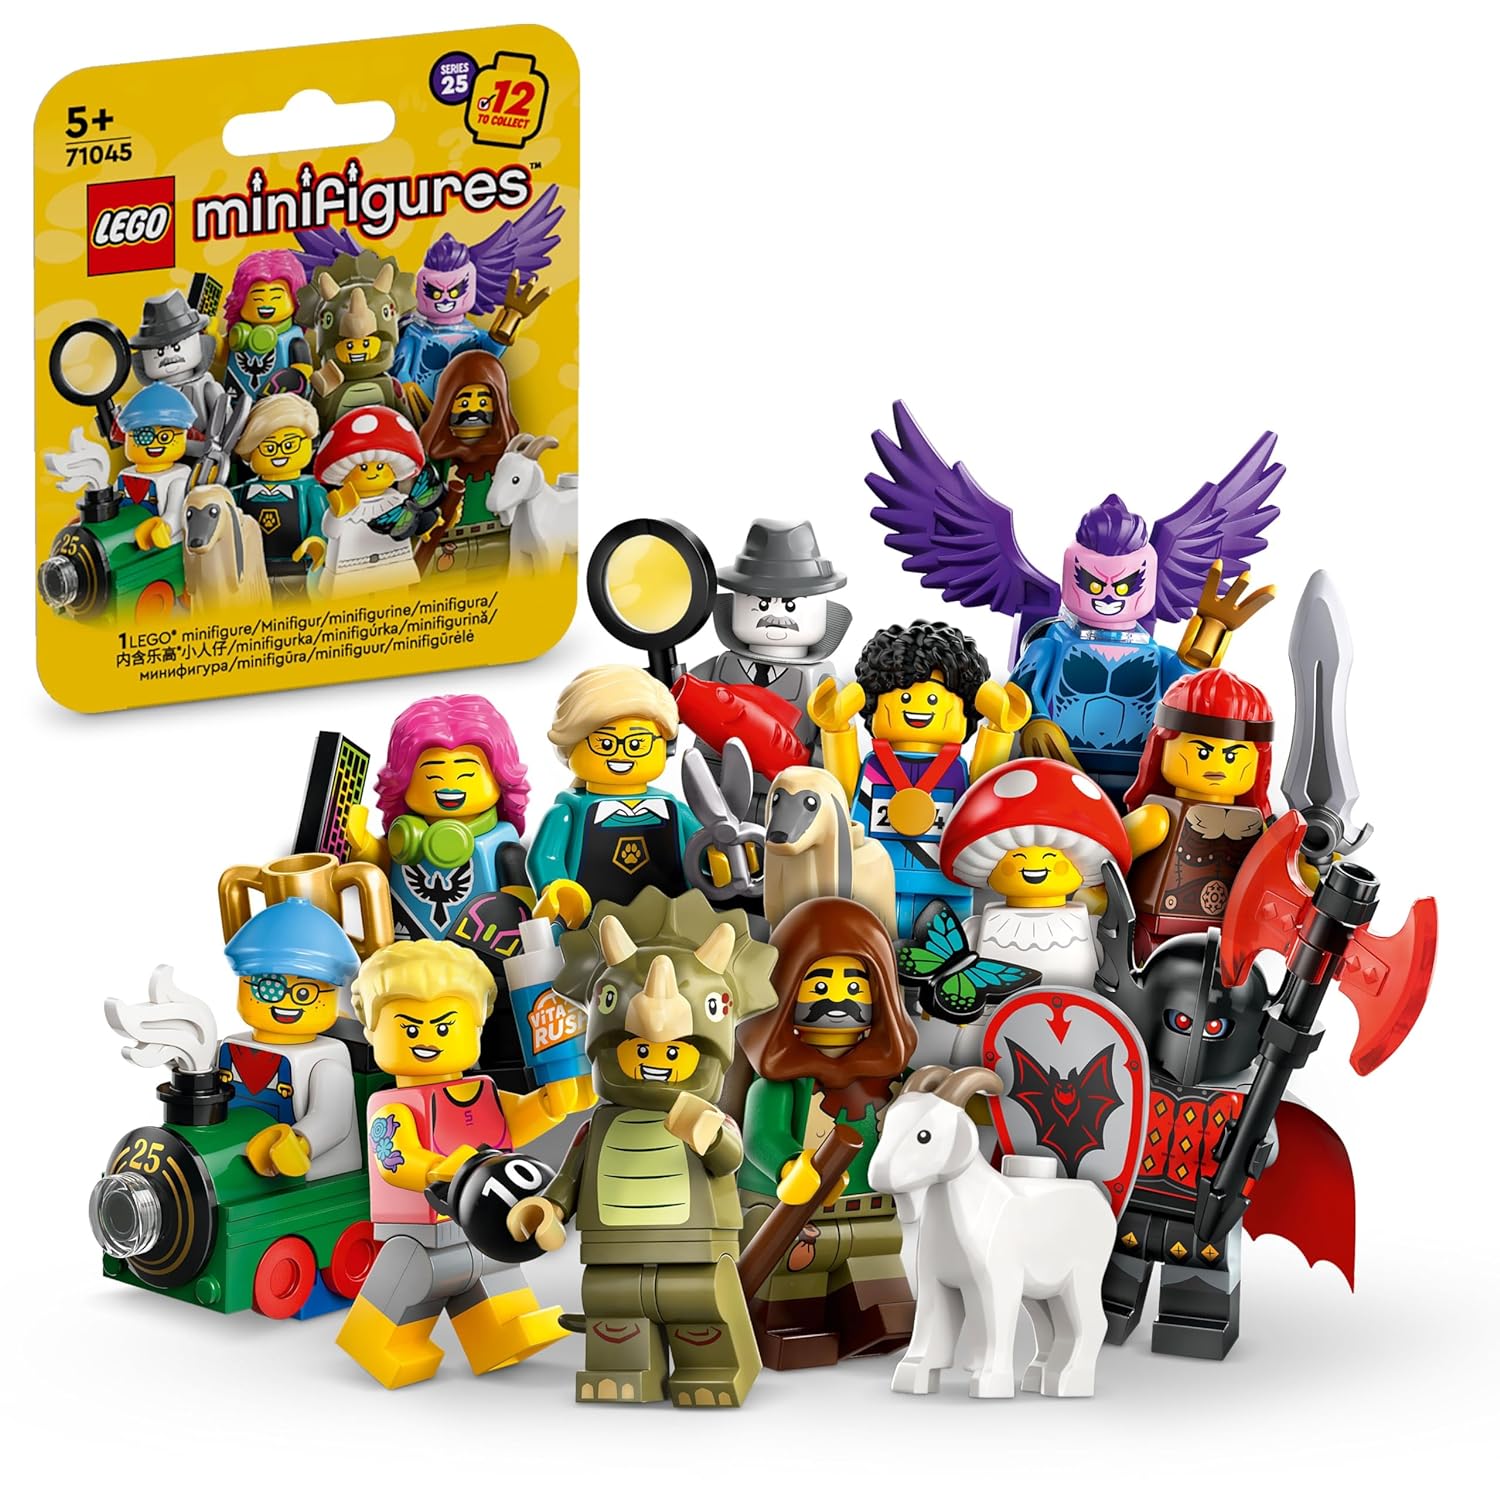 LEGO Minifigures Series 25 Collectible Figures Building Kit for Ages 5+